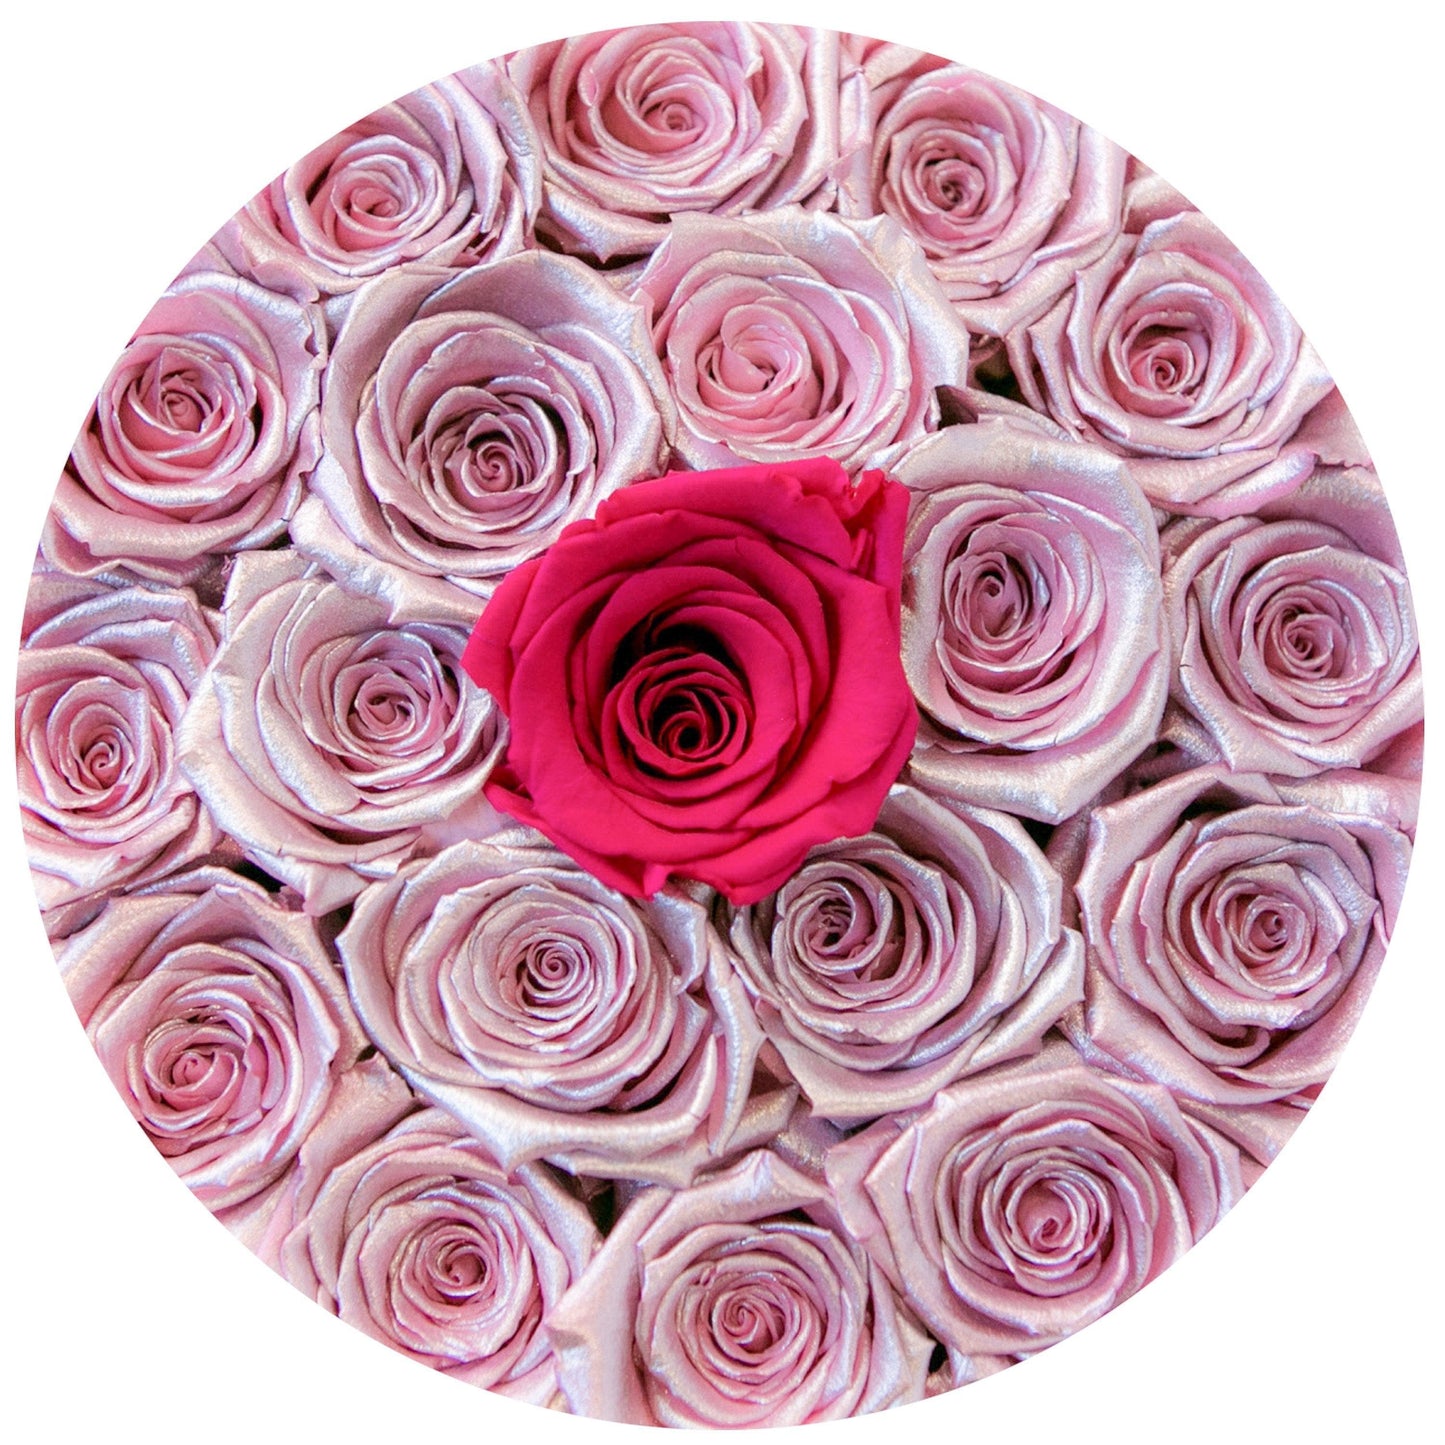 Classic White Box | Flamingo Edition |  Pink Gold & Hot Pink Roses - The Million Roses